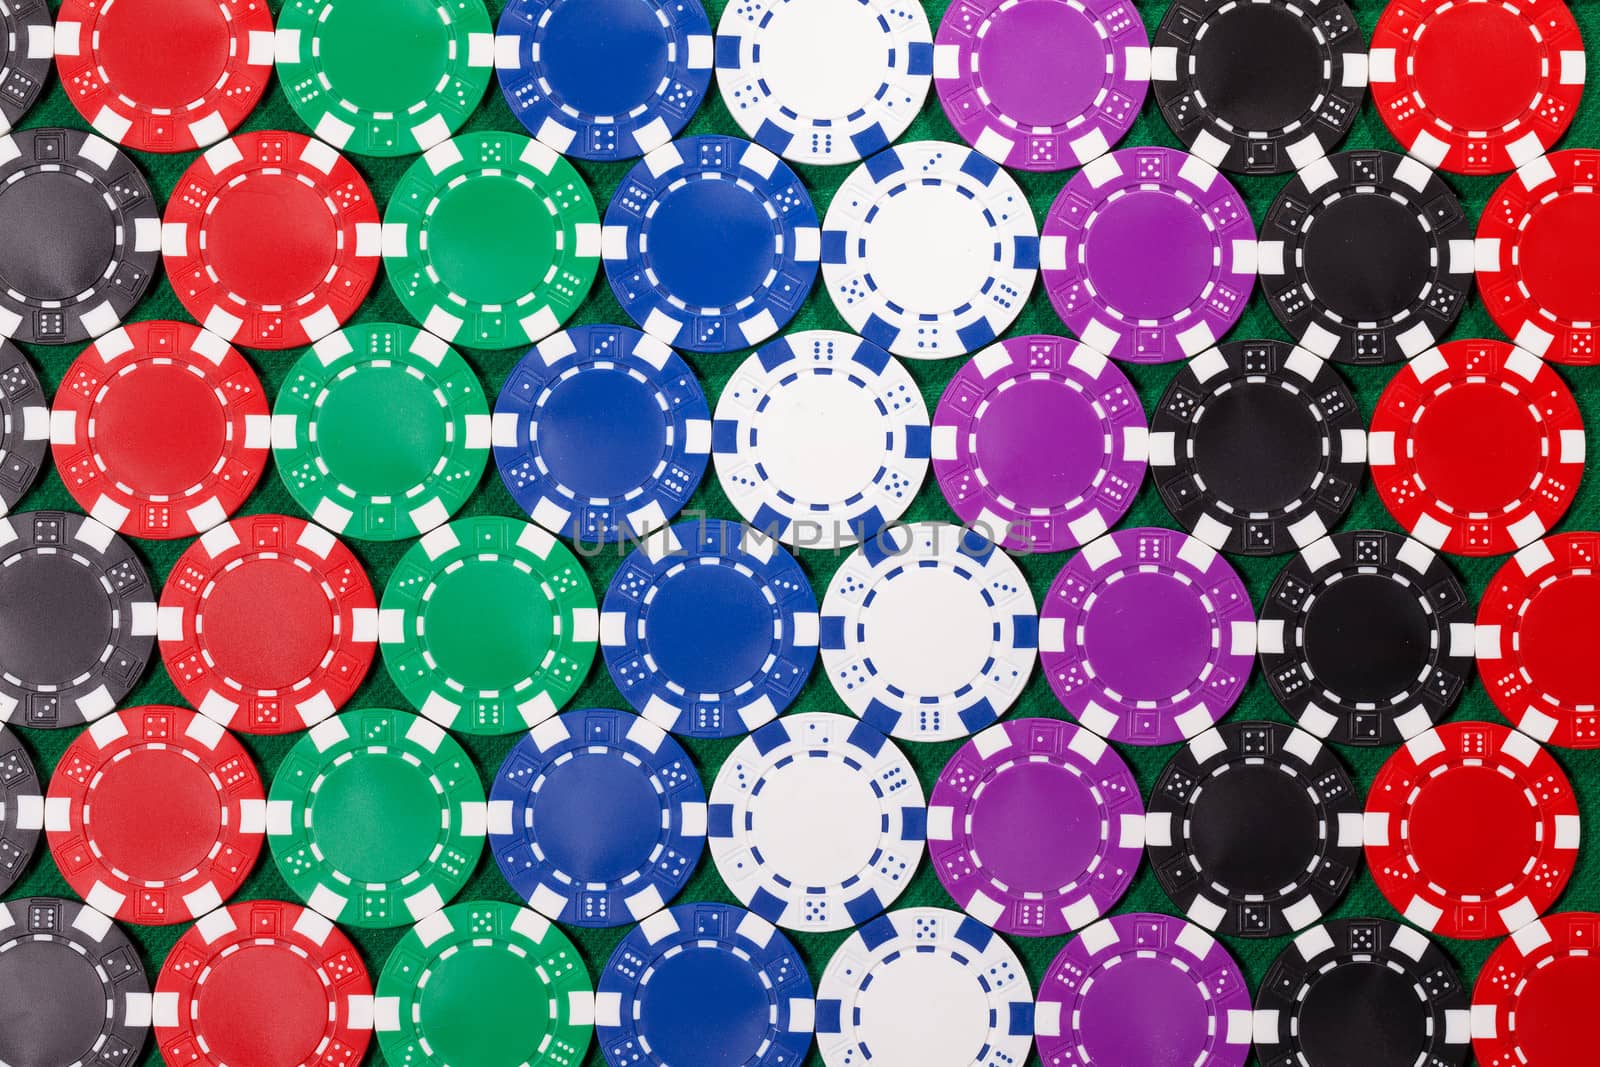 Colorful poker chips closeup on green cloth, backdrop